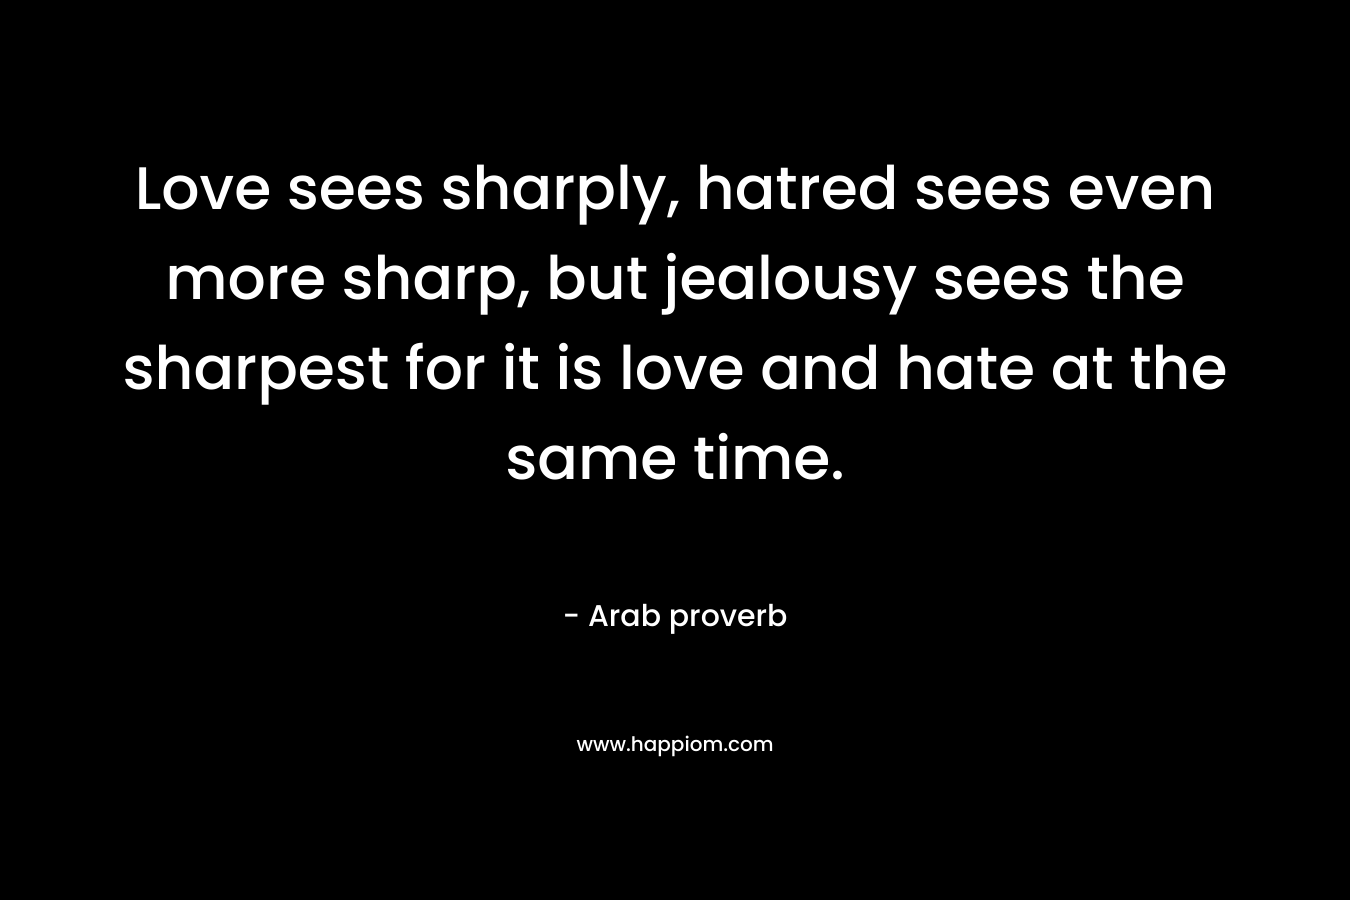 Love sees sharply, hatred sees even more sharp, but jealousy sees the sharpest for it is love and hate at the same time. – Arab proverb